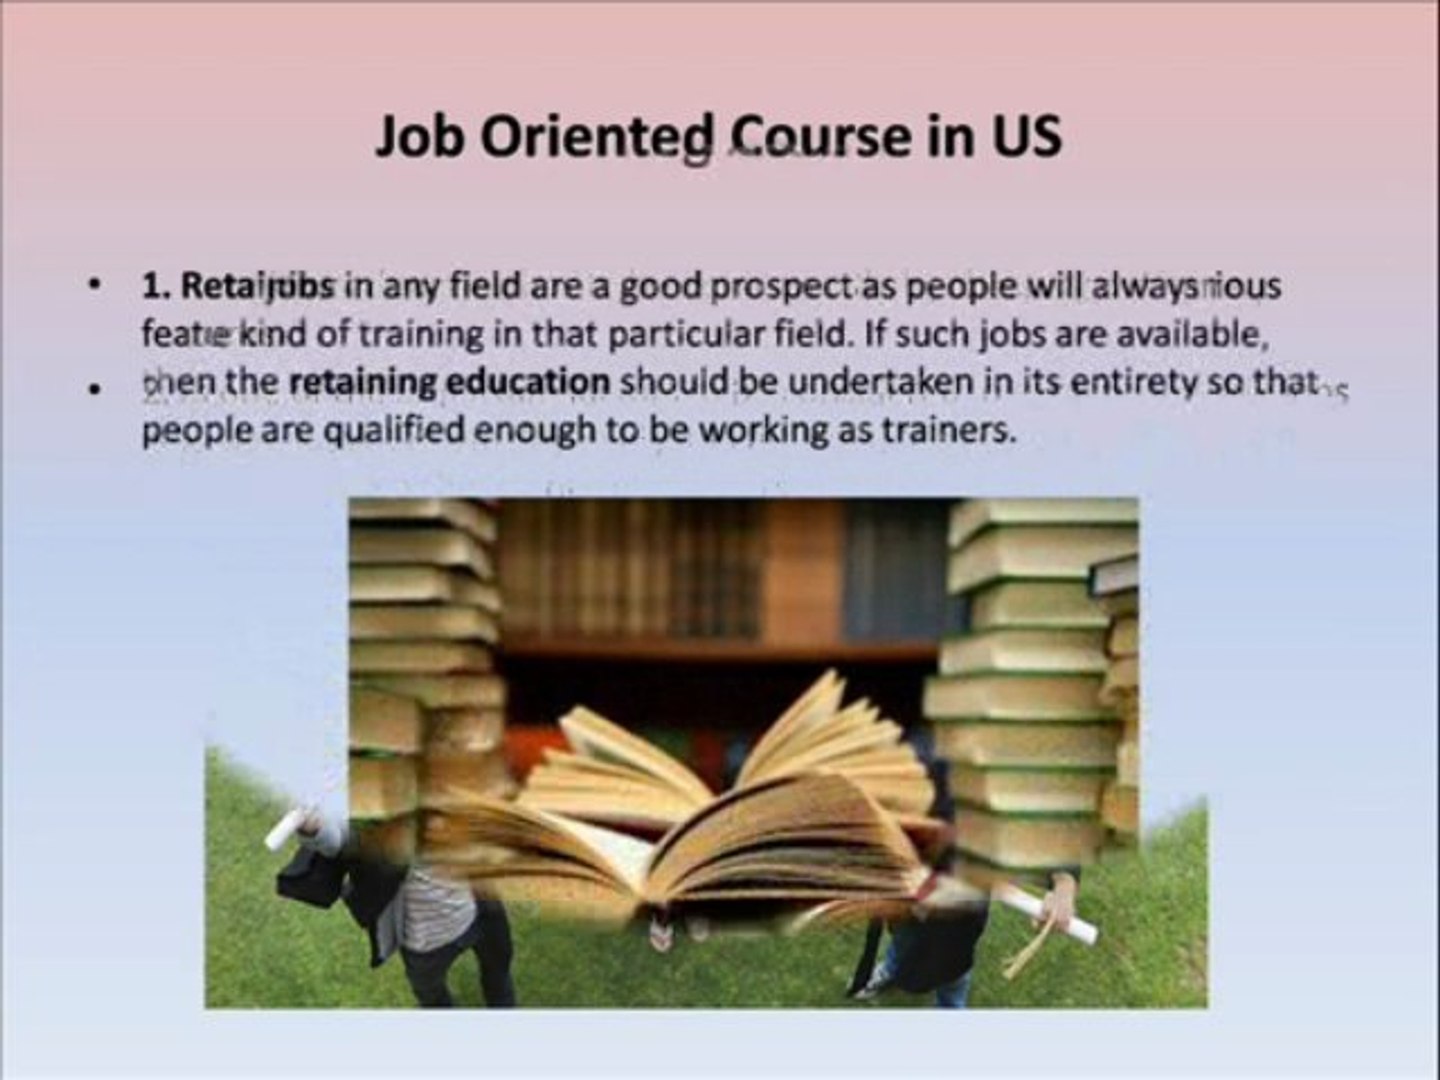 Retaining Education For Job Oriented Course In US With A Step On Future Job Options